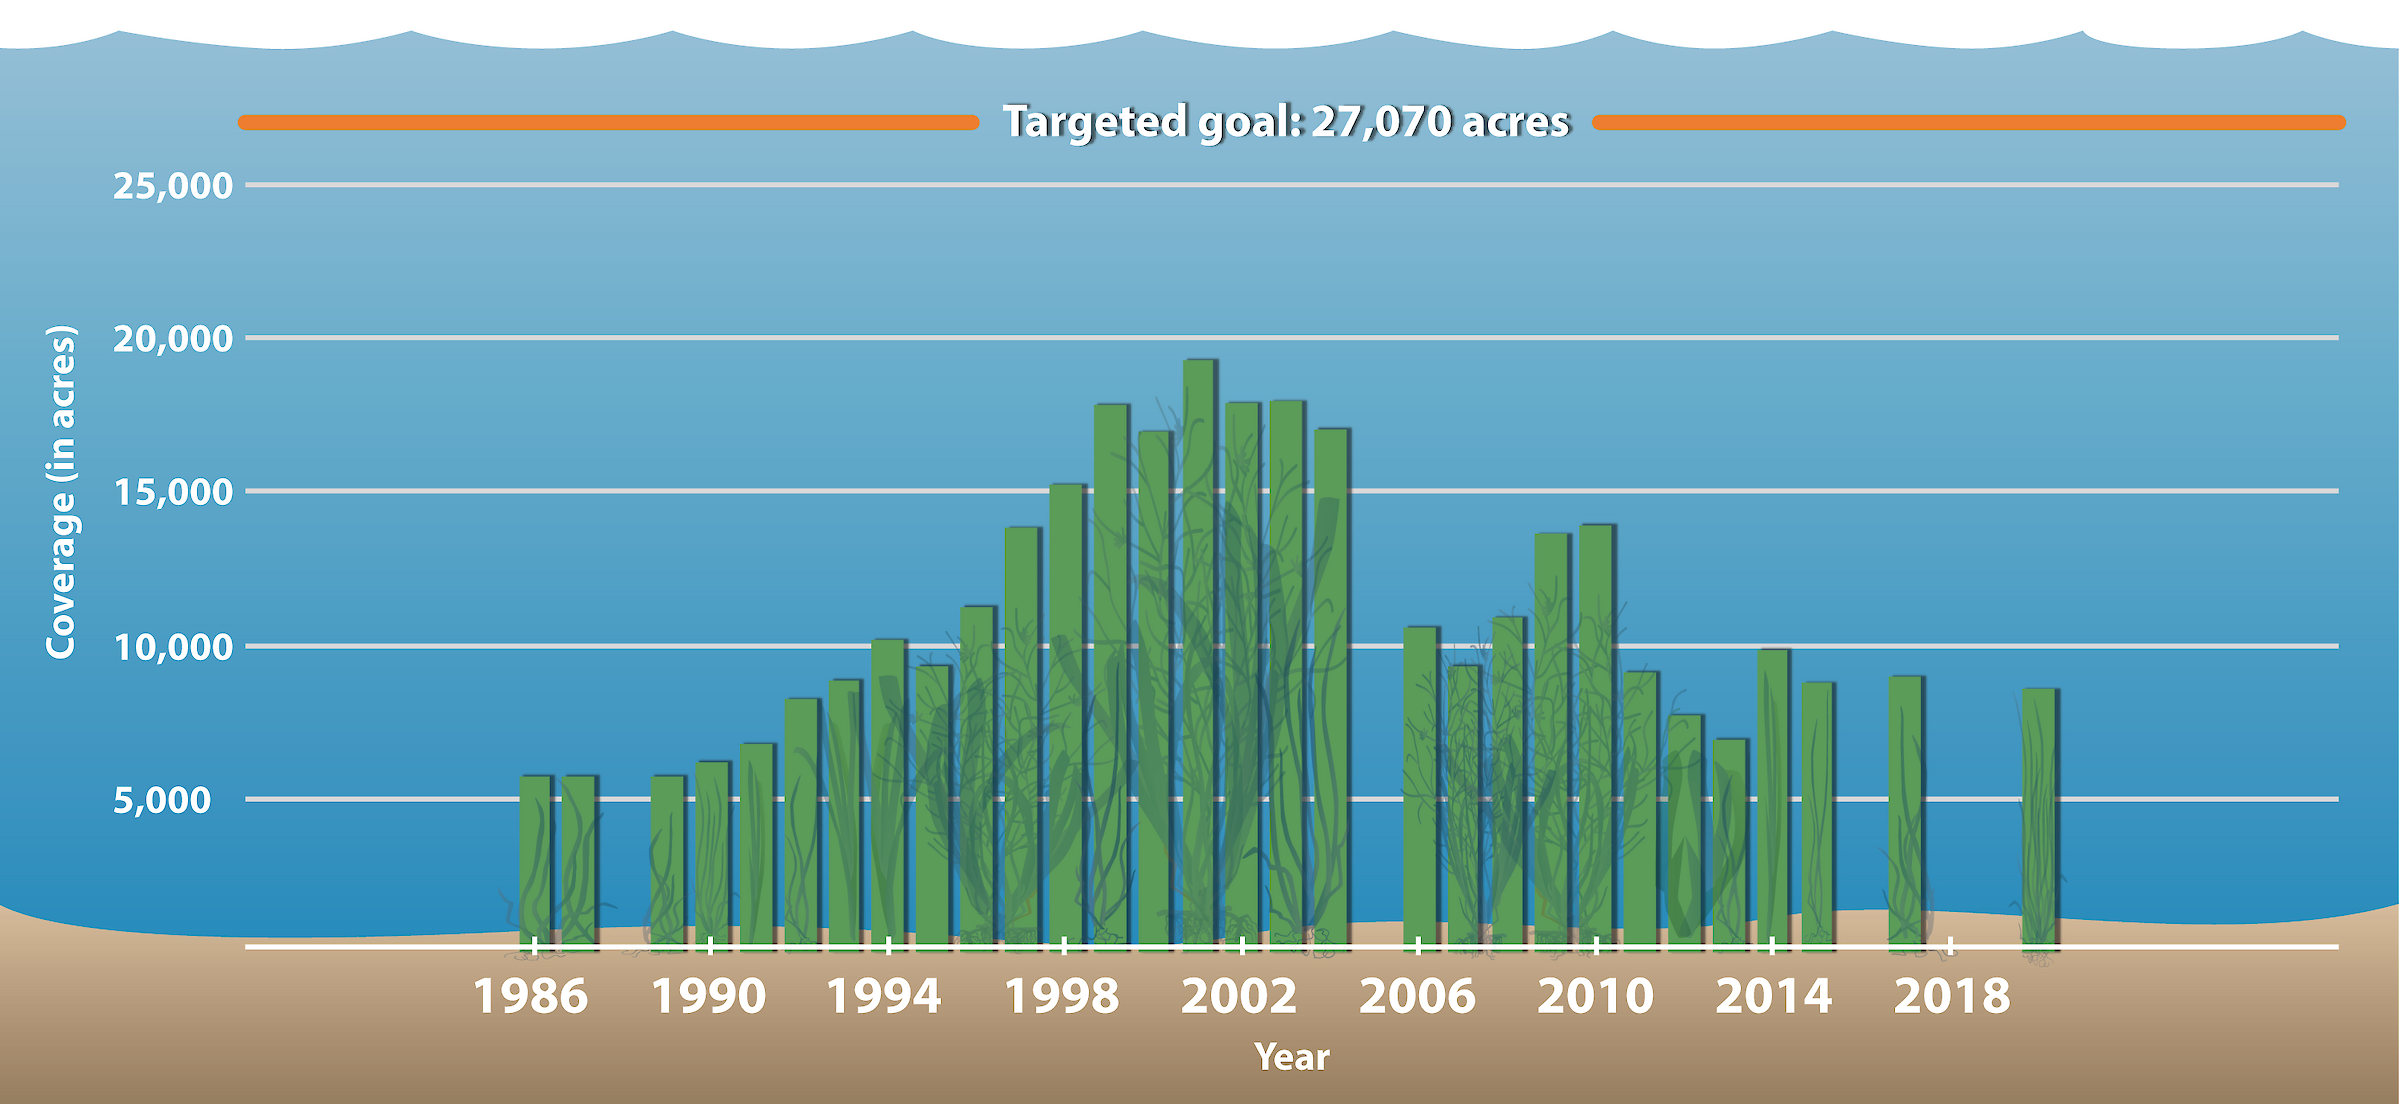 Abundance of seagrass in the Maryland Coastal Bays from 1986 through 2020. The Maryland Coastal Bays Program has a coverage goal of 27,070 acres. Data are not available for 1988, 2005, 2016, 2018 and 2019.